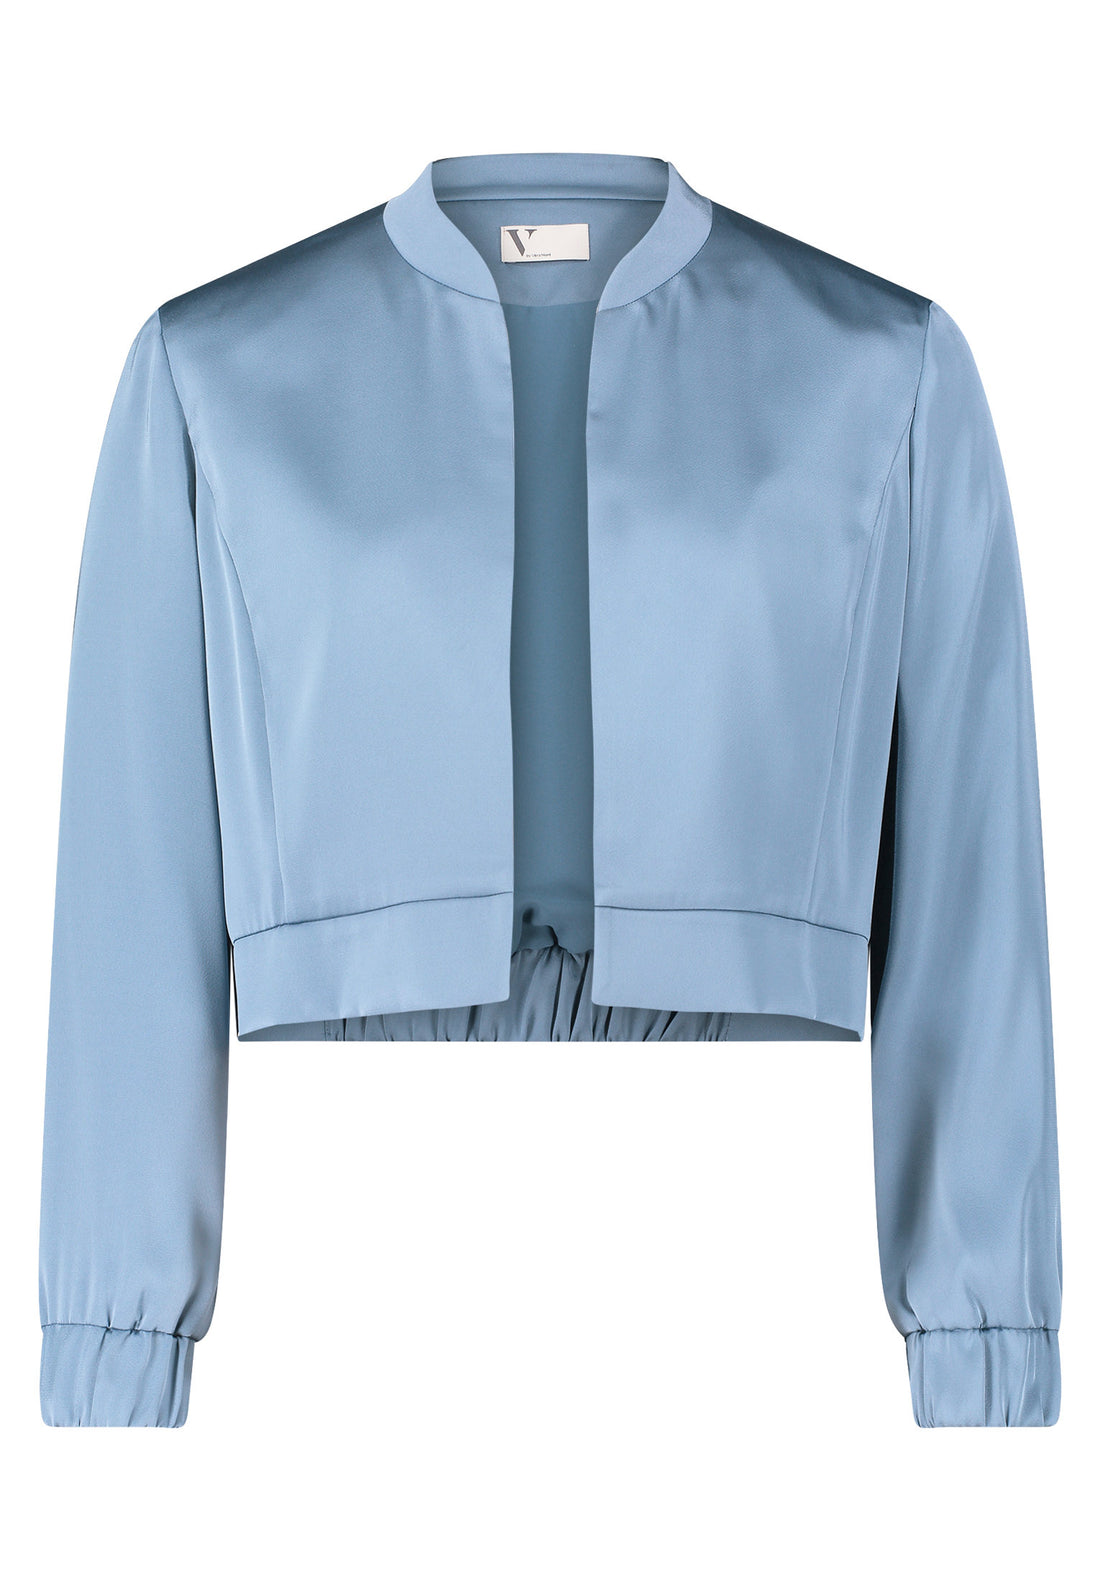 Cropped Bomber Jacket With No Closures_0305 4262_8307_01